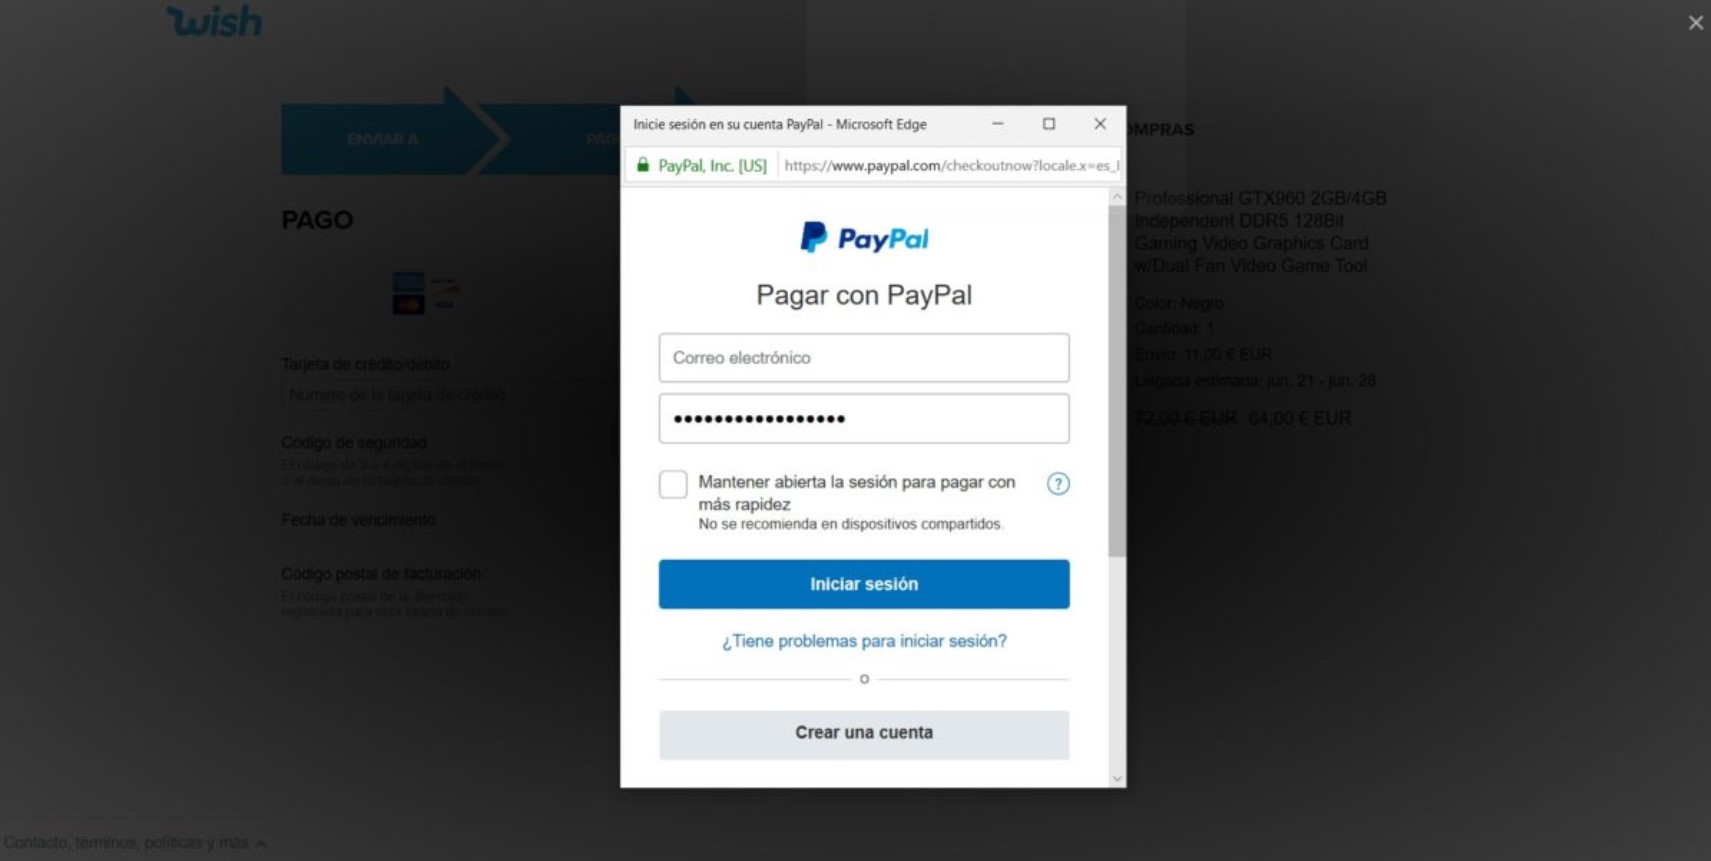 PAYPAL AS A PAYMENT METHOD